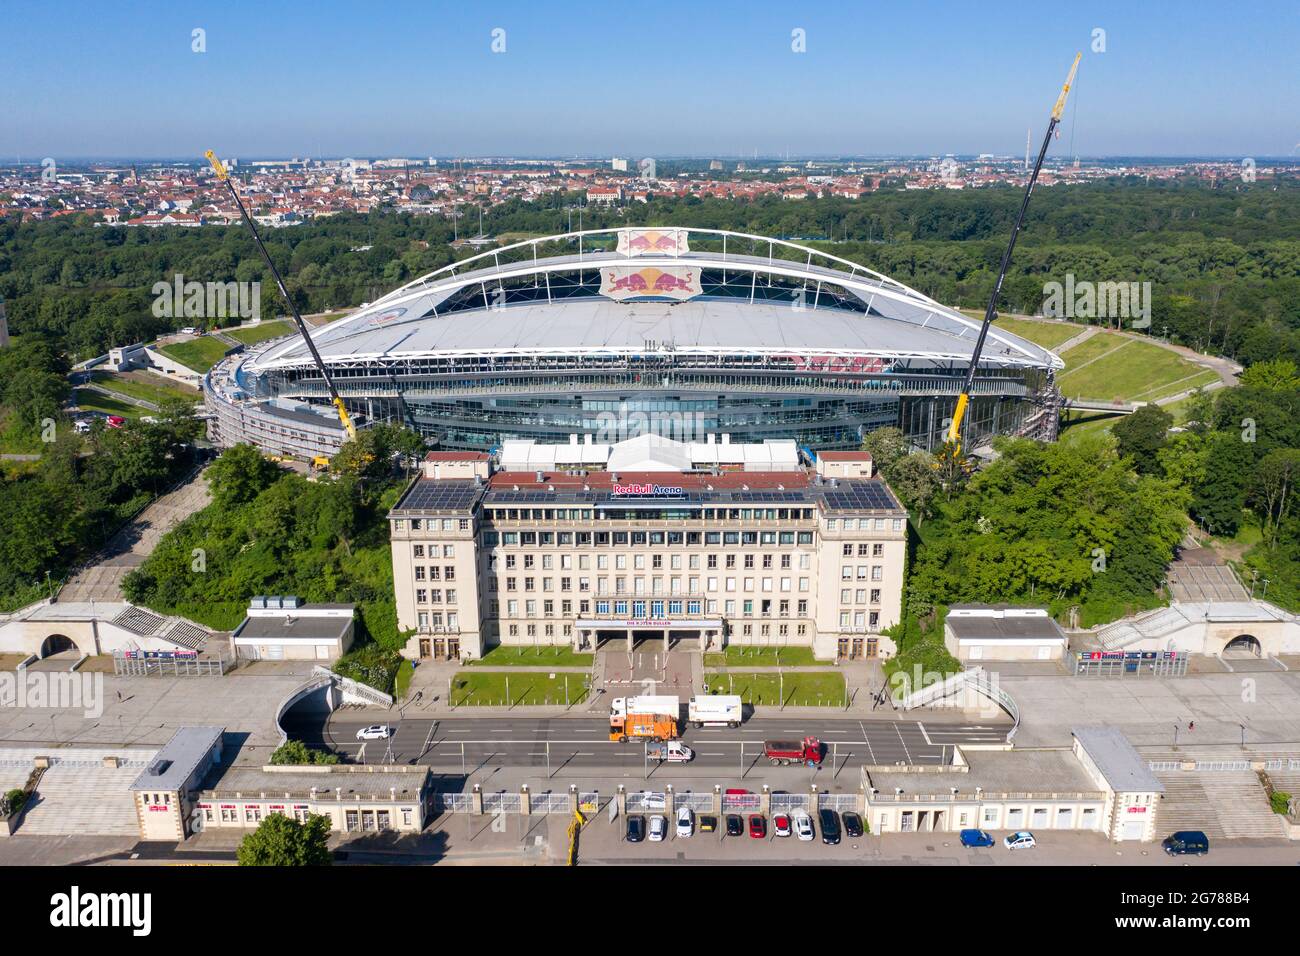 14 June 2021, Saxony, Leipzig: Two cranes stand at the Red Bull Arena. RB Leipzig's home ground is being rebuilt. The spectator capacity increases from 42,558 to 47,069 standing and seated. The outside of the stadium is enclosed with a soundproof facade. The embankment of the former Zentralstadion, which encompasses the arena, was cut open behind the historic bell tower to make room for a new entrance. RB Leipzig is investing a good 60 million euros in the conversion by 2022. (Aerial view with drone) Photo: Jan Woitas/dpa-Zentralbild/ZB - IMPORTANT NOTE: In accordance with the regulations of t Stock Photo